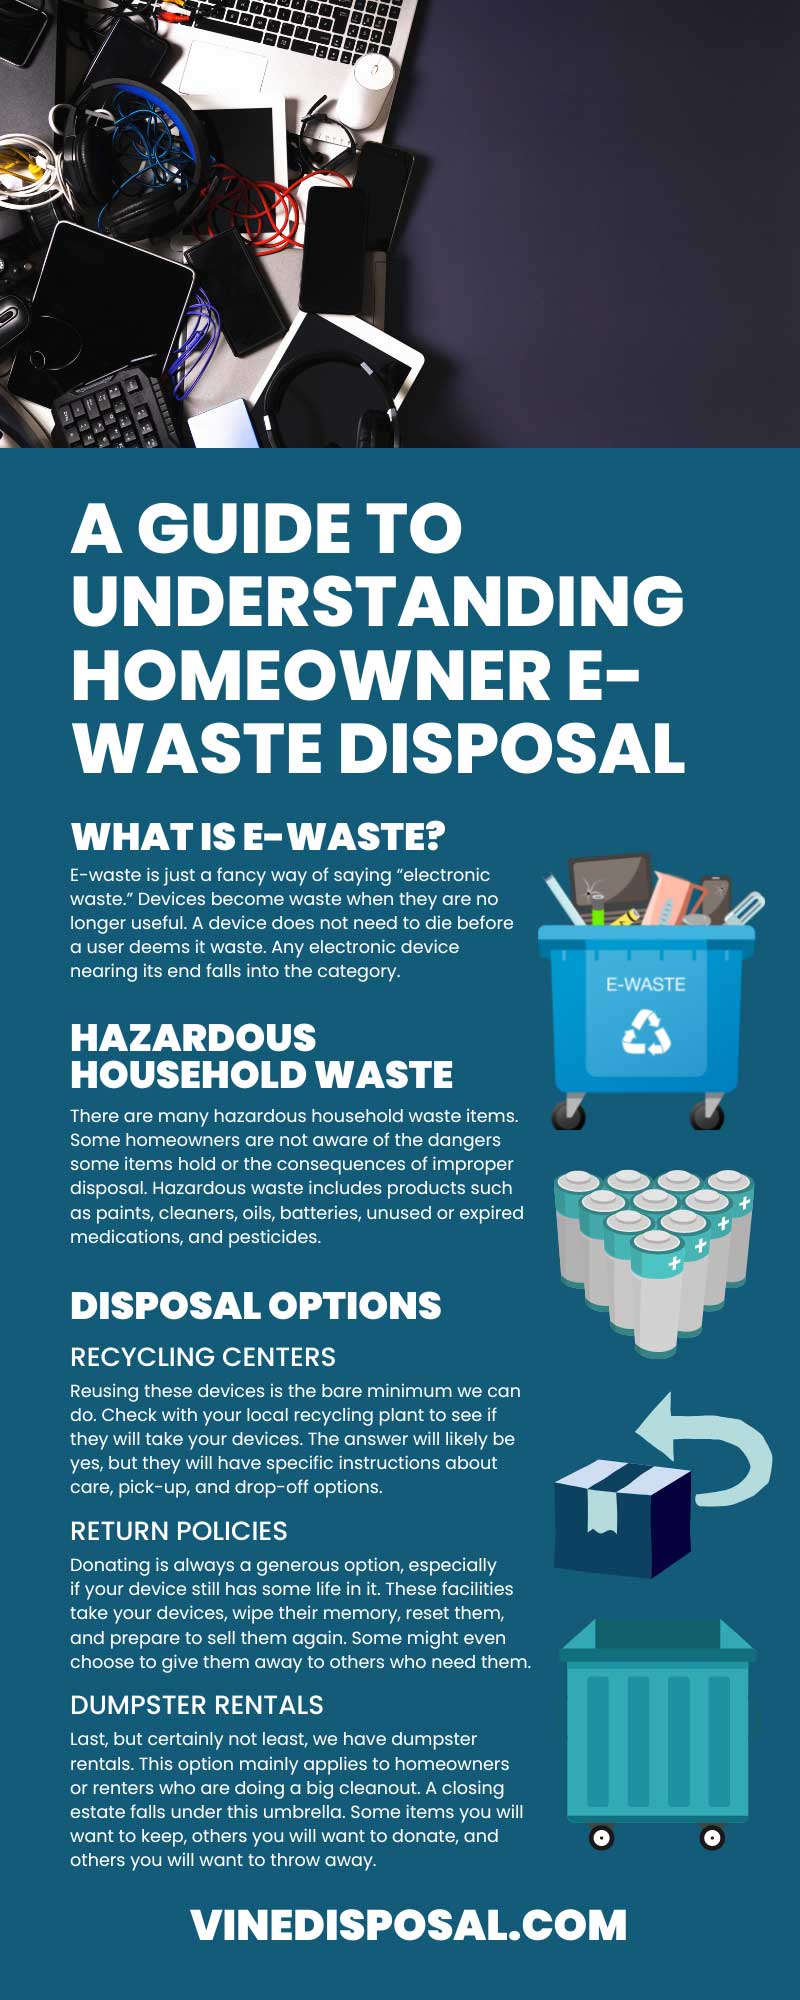 A Guide to Understanding Homeowner E-Waste Disposal